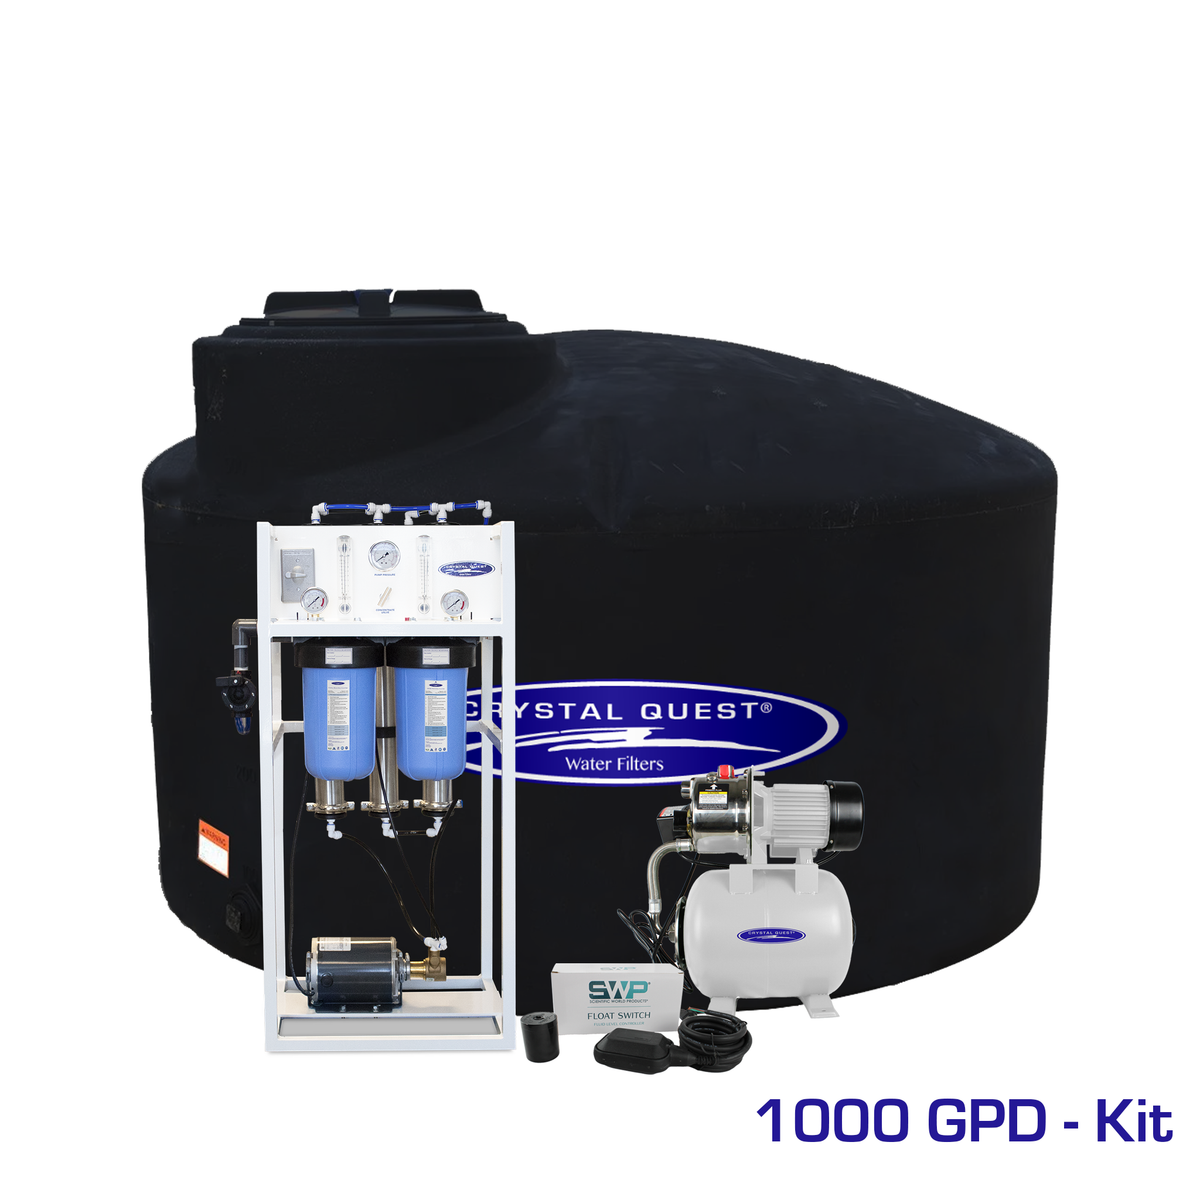 1,000 GPD / Add Storage Tank Kit (550 Gal) Commercial Mid-Flow Reverse Osmosis System (500-7000 GPD) - Commercial - Crystal Quest